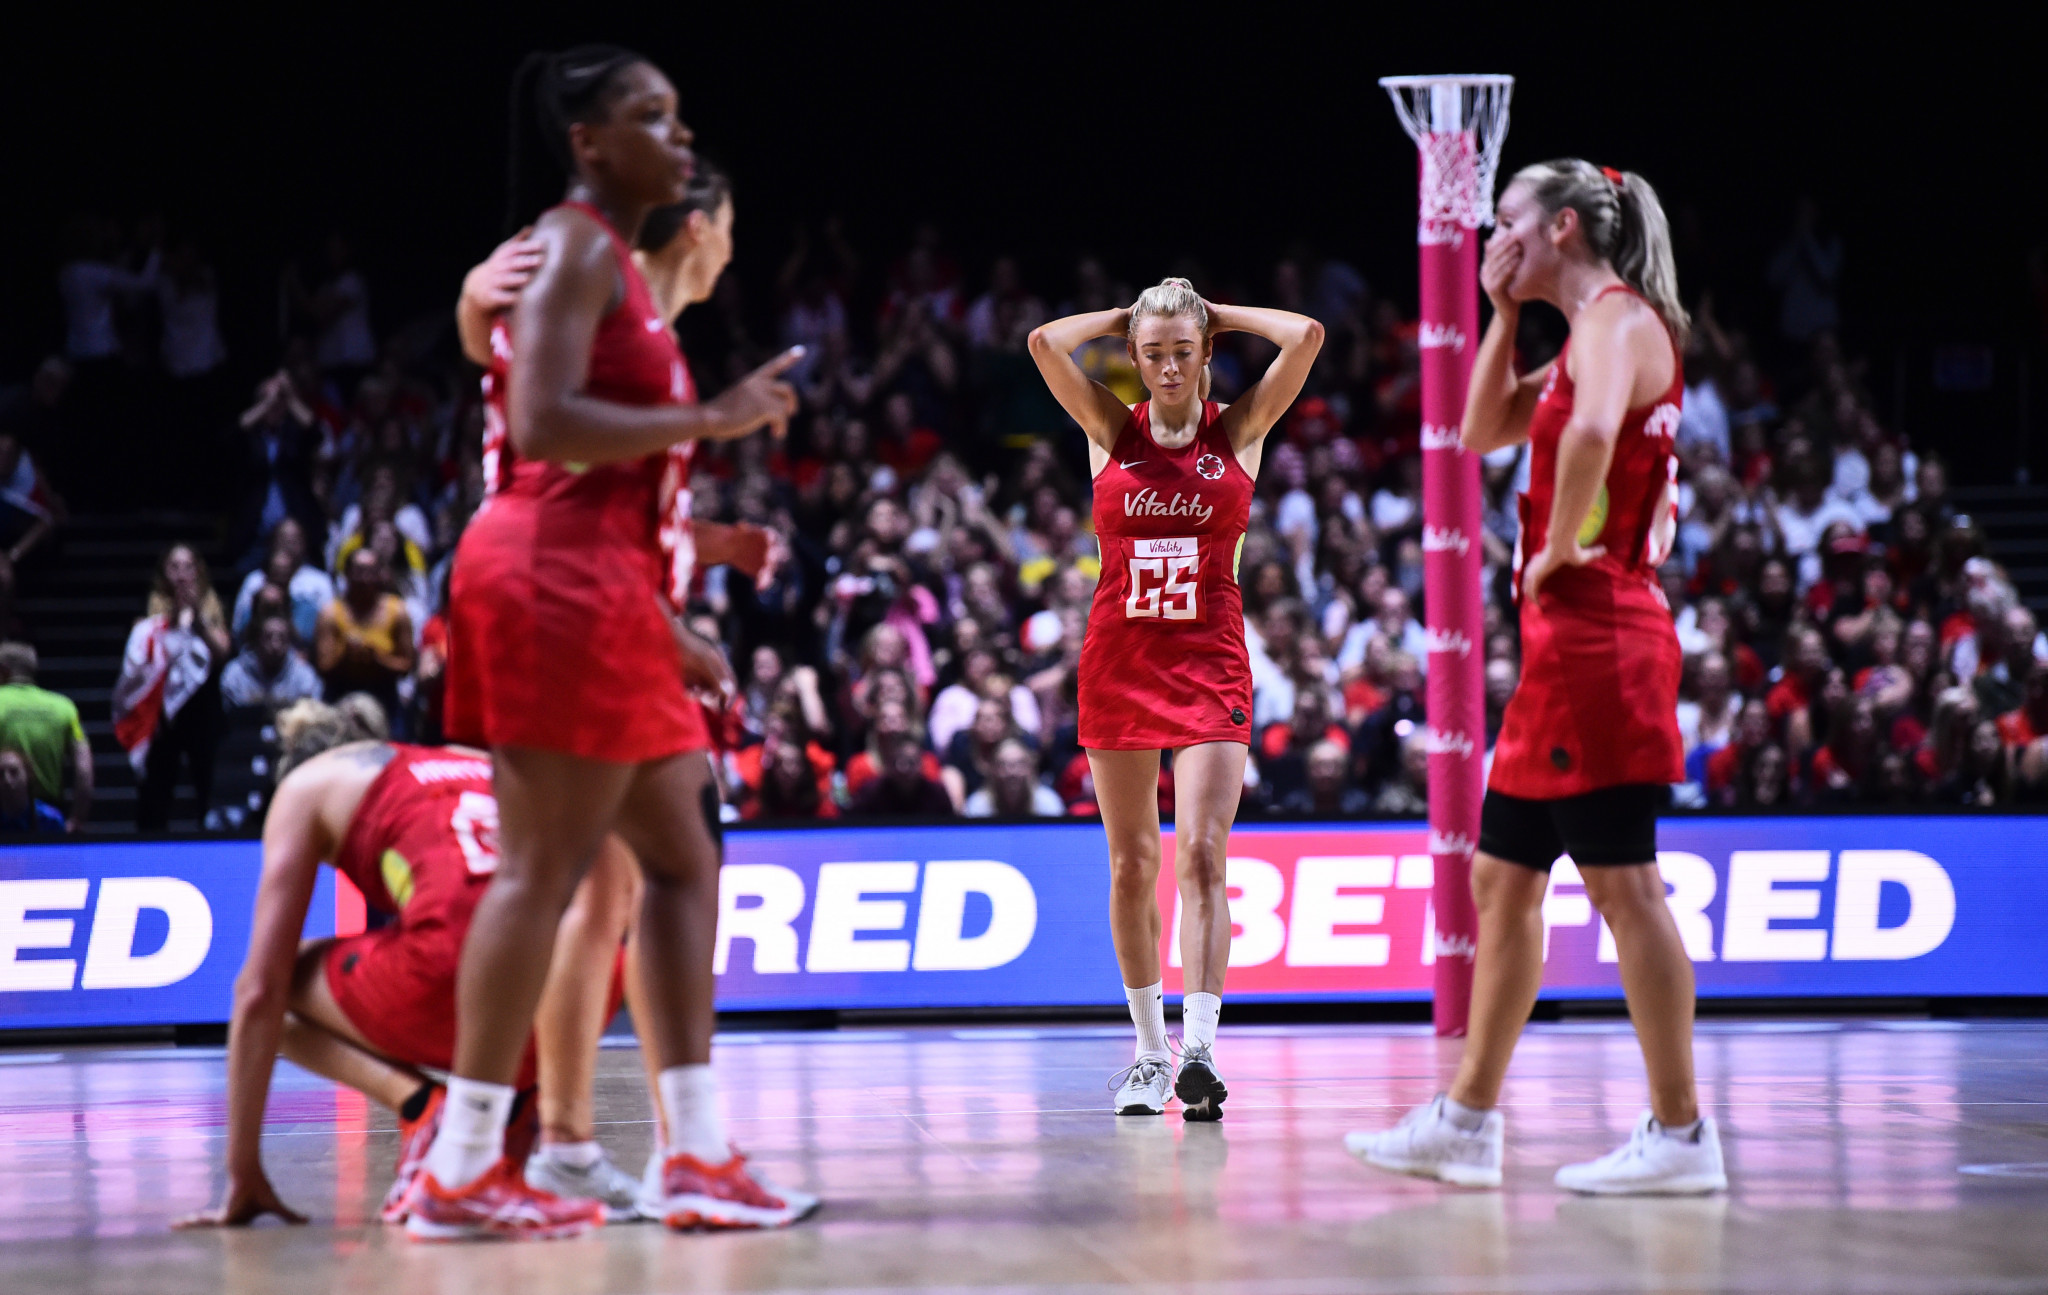 England were knocked out of last year's Netball World Cup by New Zealand ©Getty Images